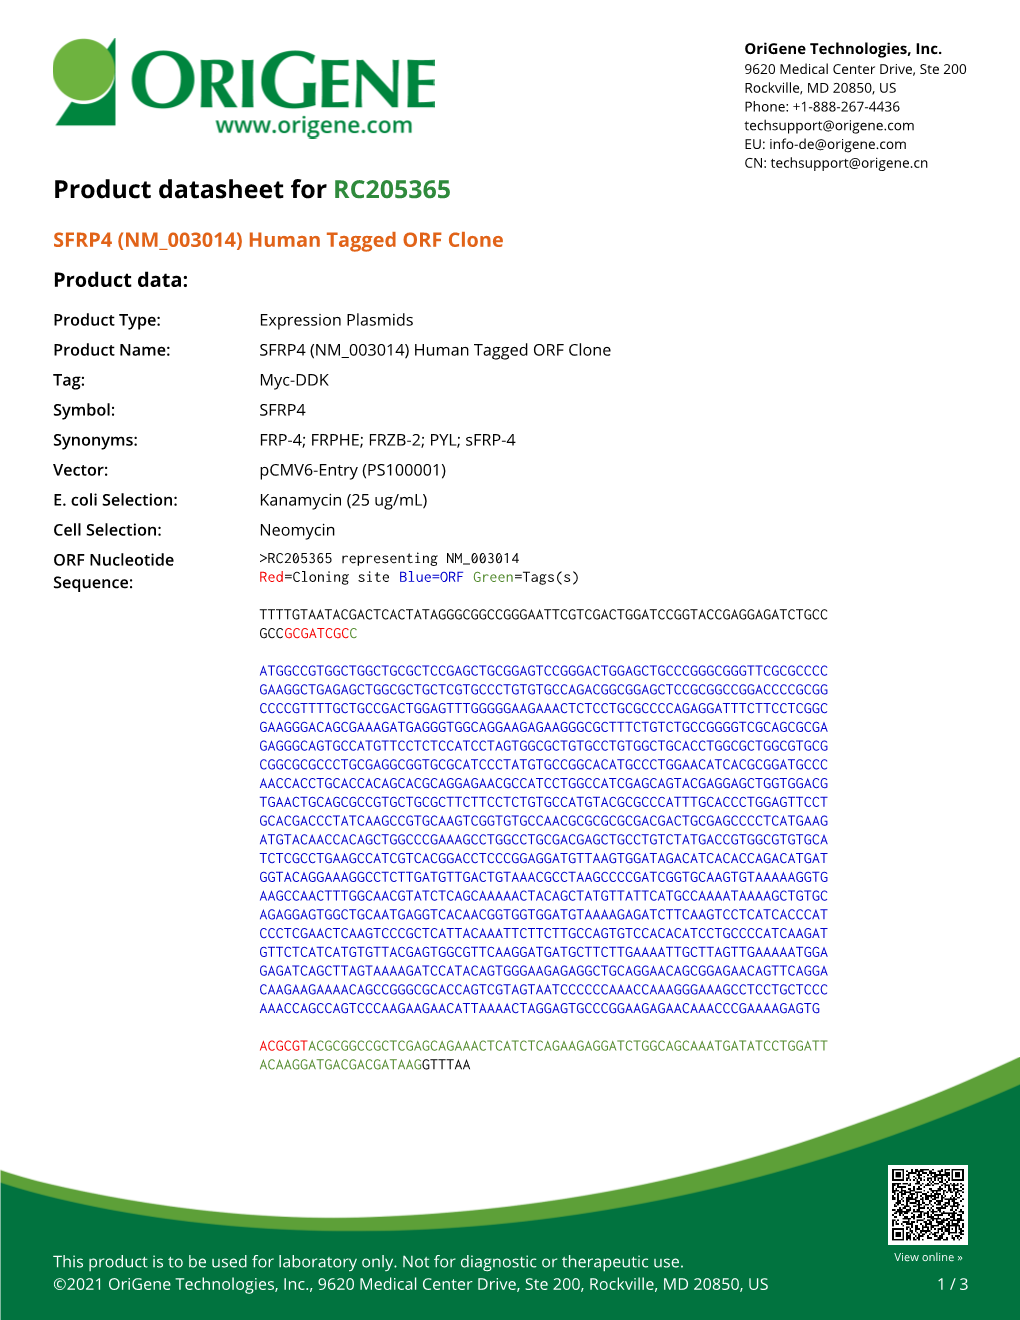 SFRP4 (NM 003014) Human Tagged ORF Clone Product Data